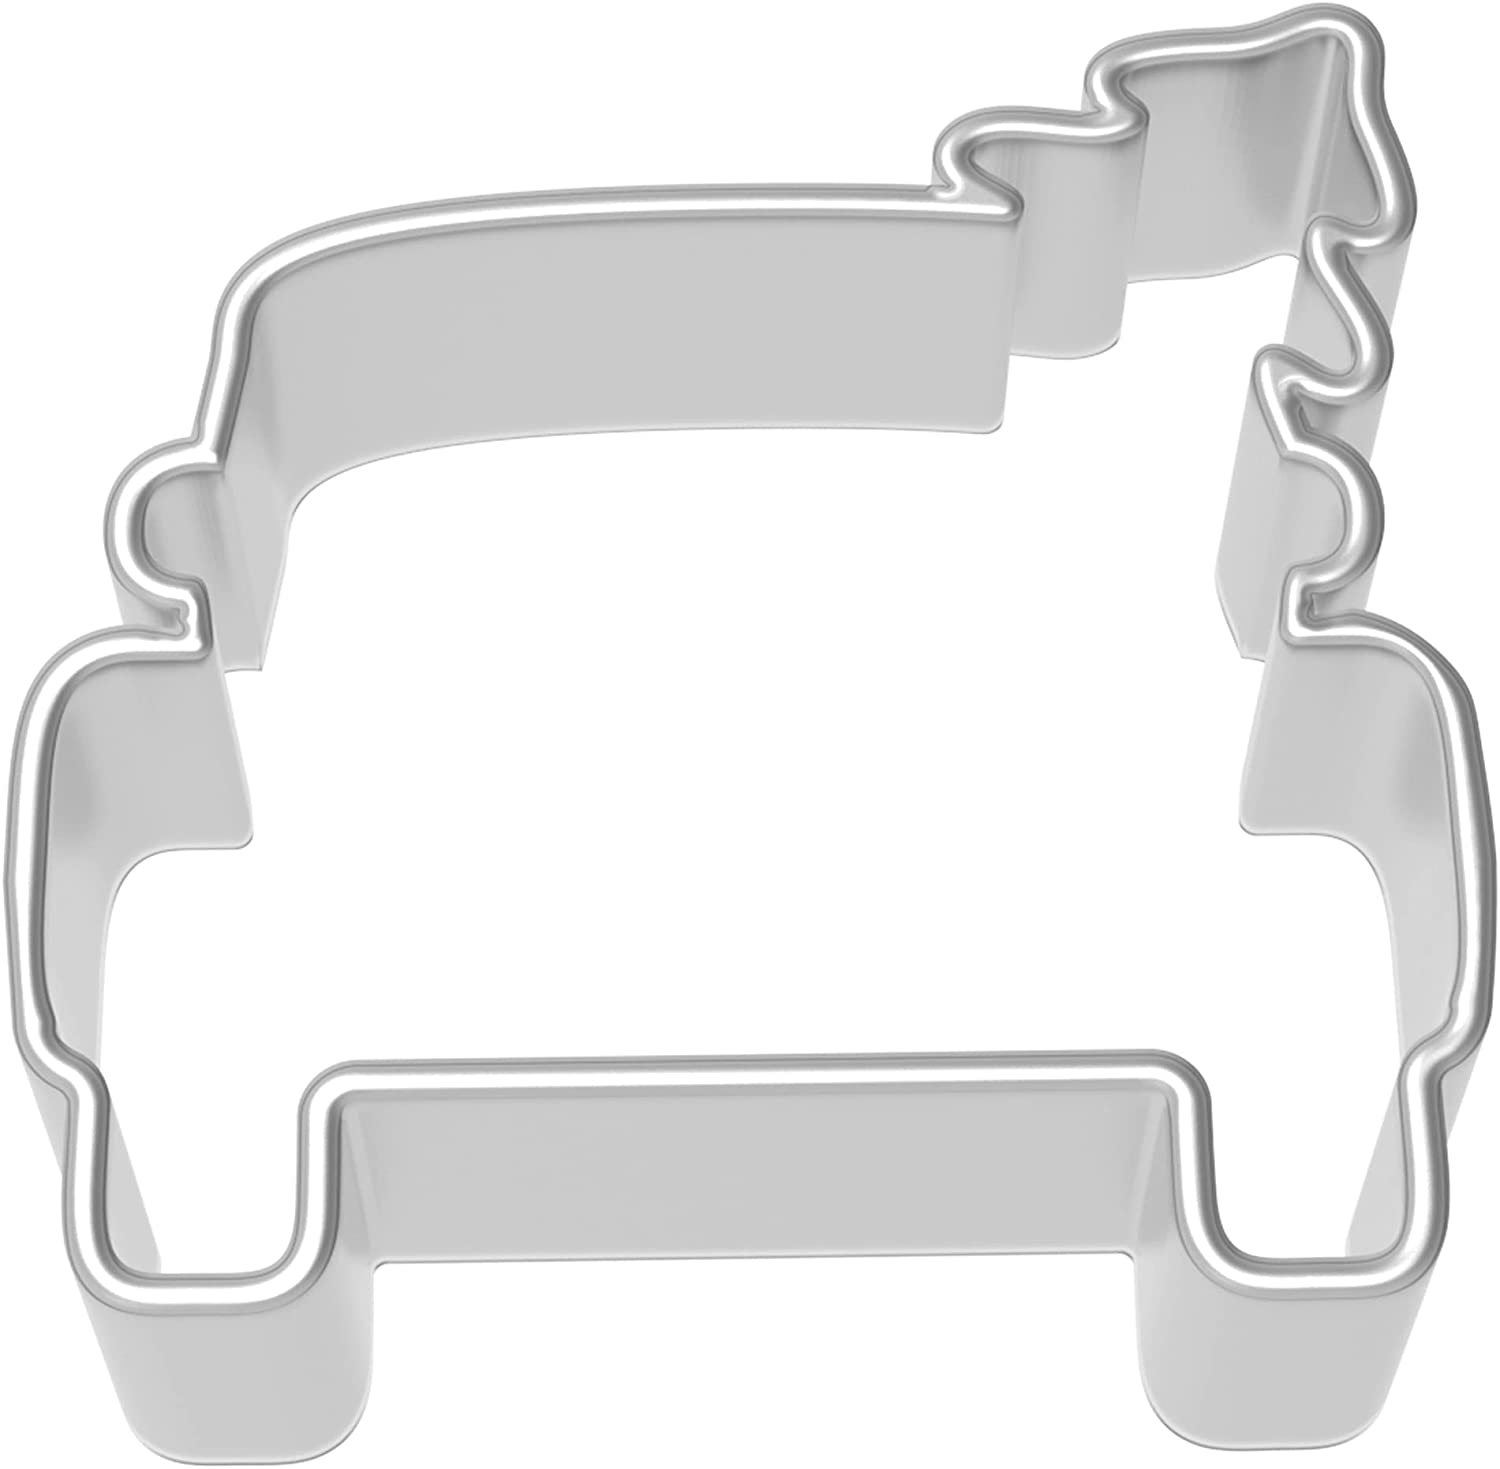 truck shaped shaped metal cookie cutter.